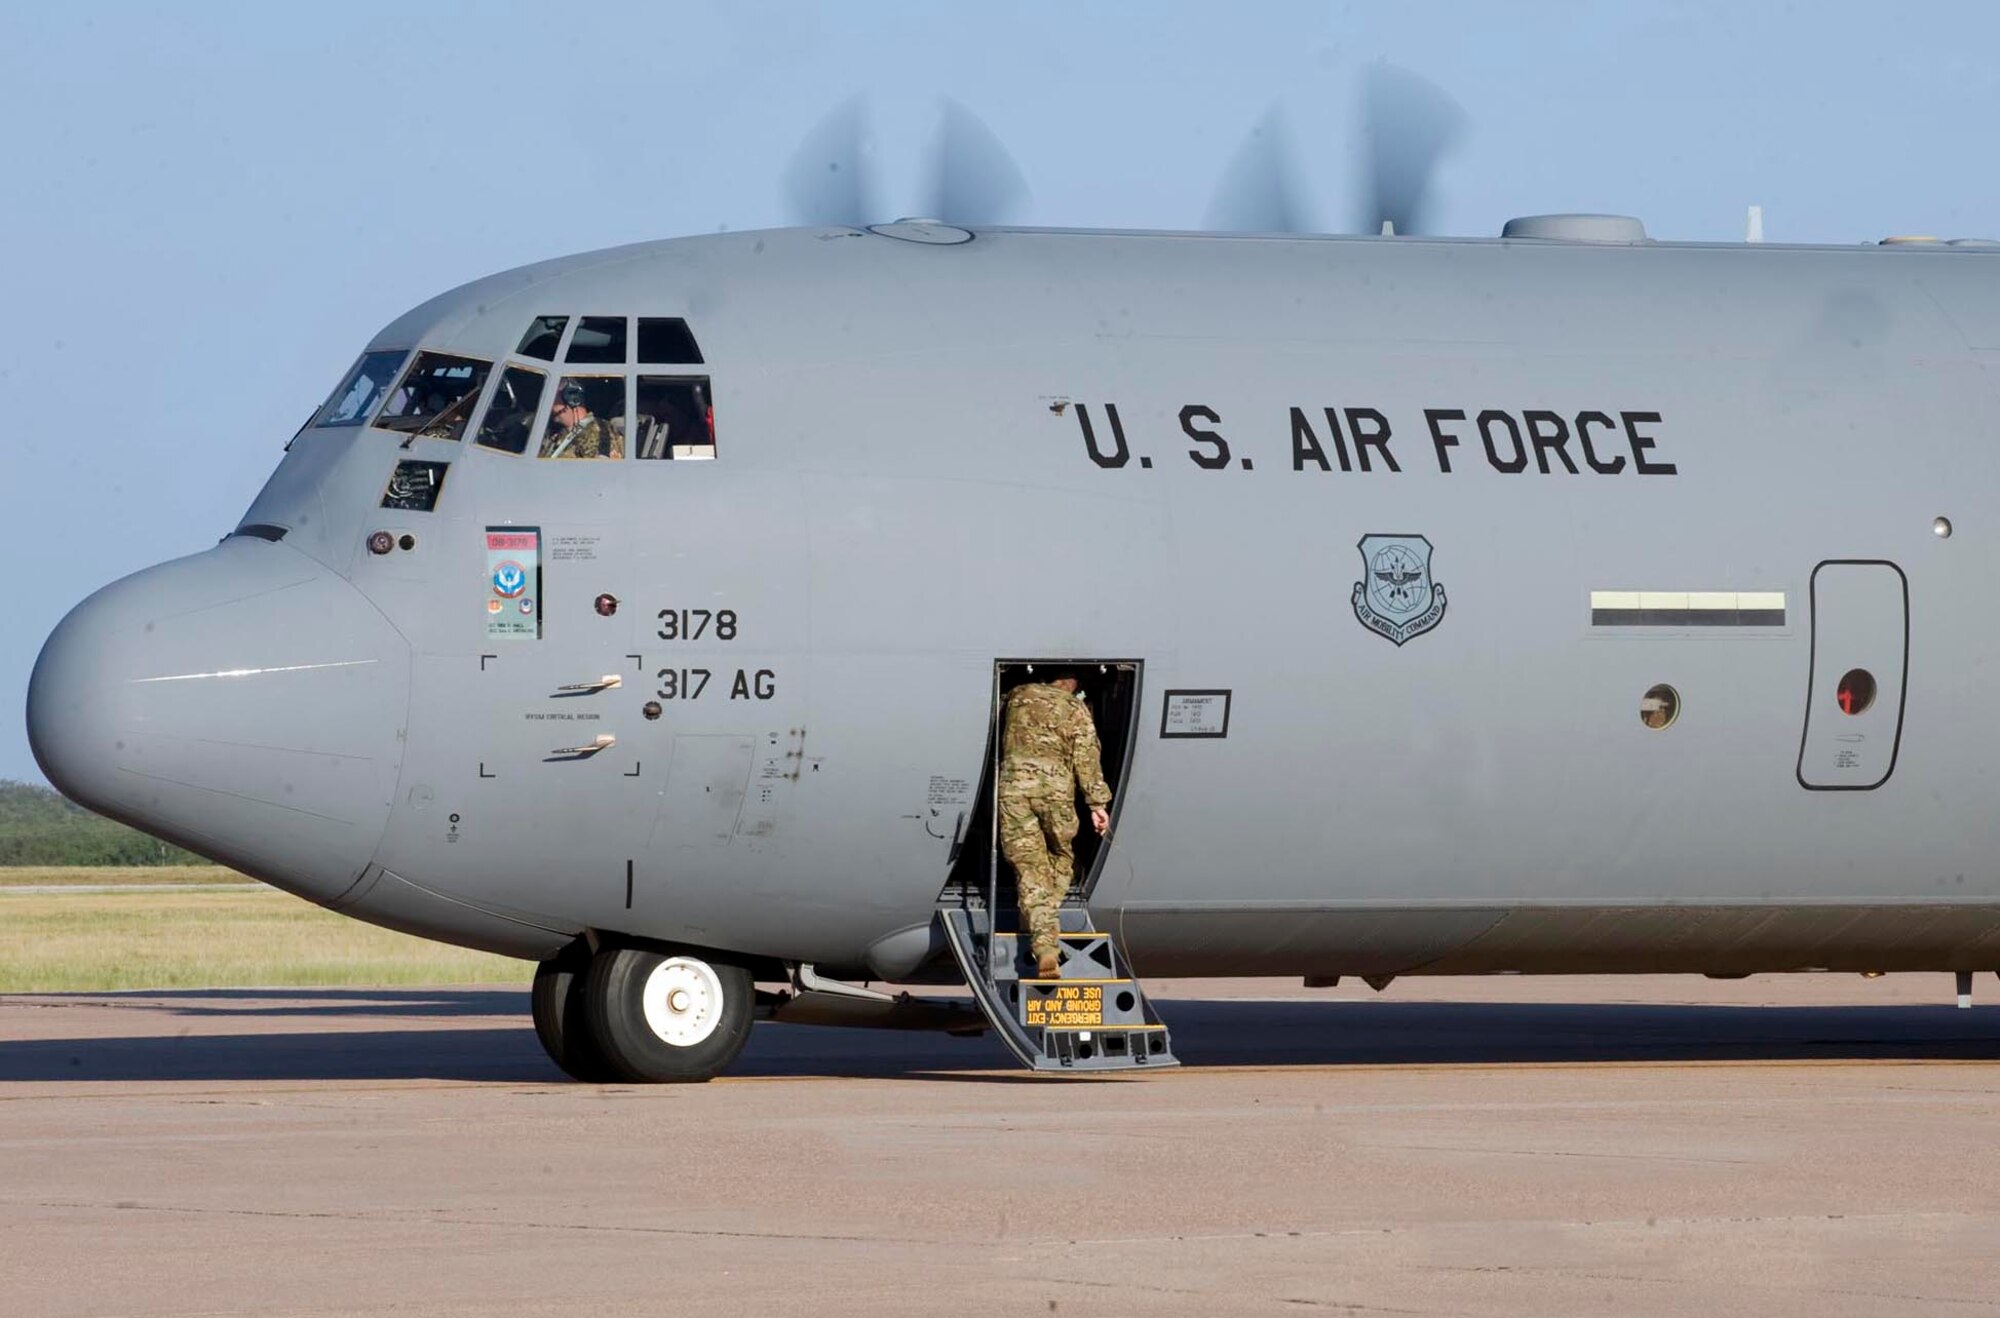 One last U.S. Air Force Airman boards a C-130 J-model before take-off Sept. 3, 2013, at Dyess Air Force Base, Texas. The 39th Airlift Group recently deployed in support of U.S. Central Command missions. While deployed, Airmen will support theater commander’s requirements with combat-delivery capability through tactical airland and airdrop operations as well as humanitarian efforts and aeromedical evacuation. (U.S. Air Force photo by Airman 1st Class Kylsee Wisseman)